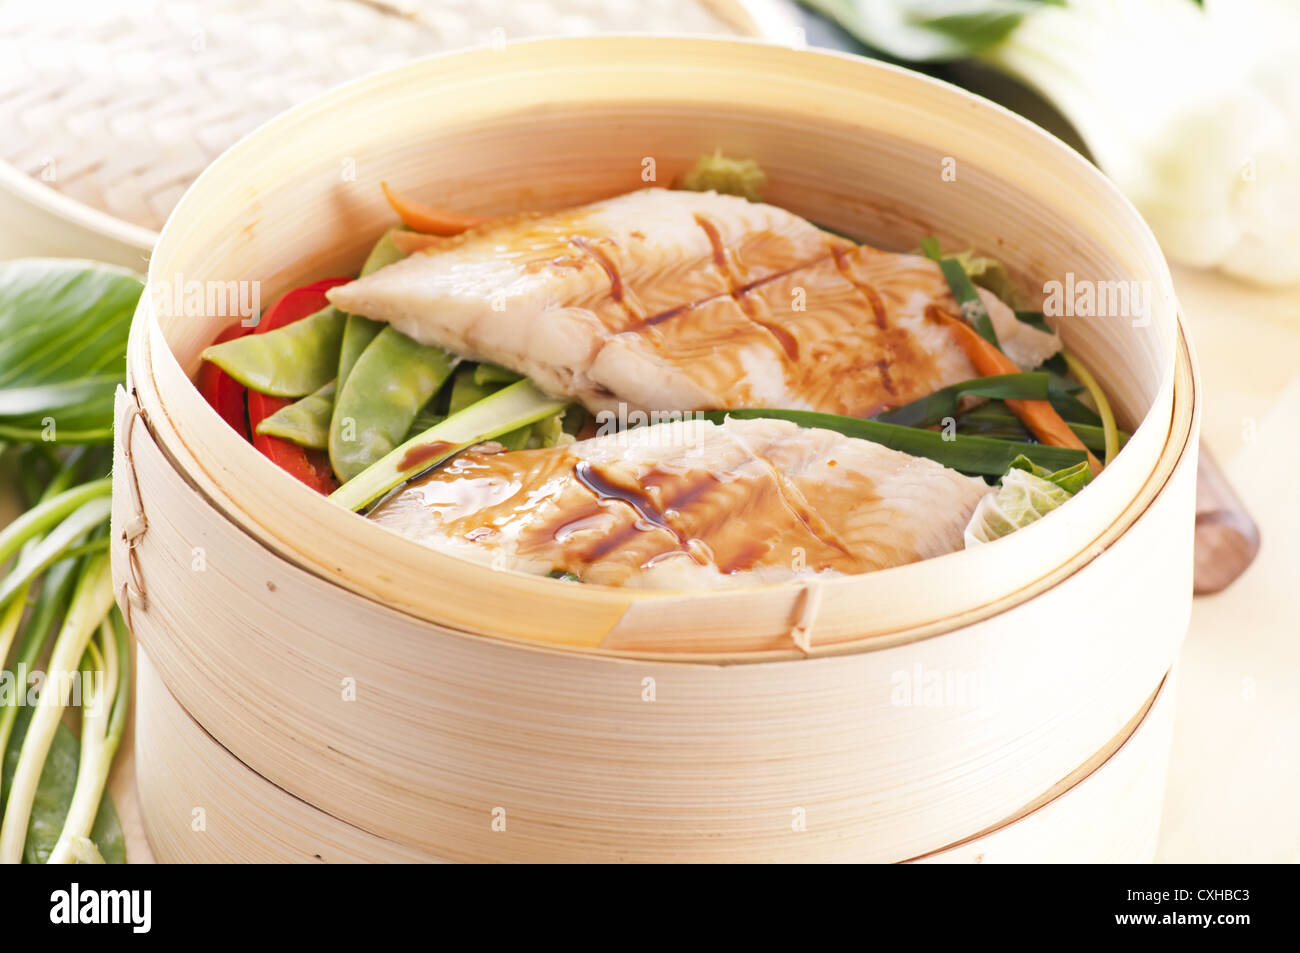 Fish with vegetables steamed Stock Photo